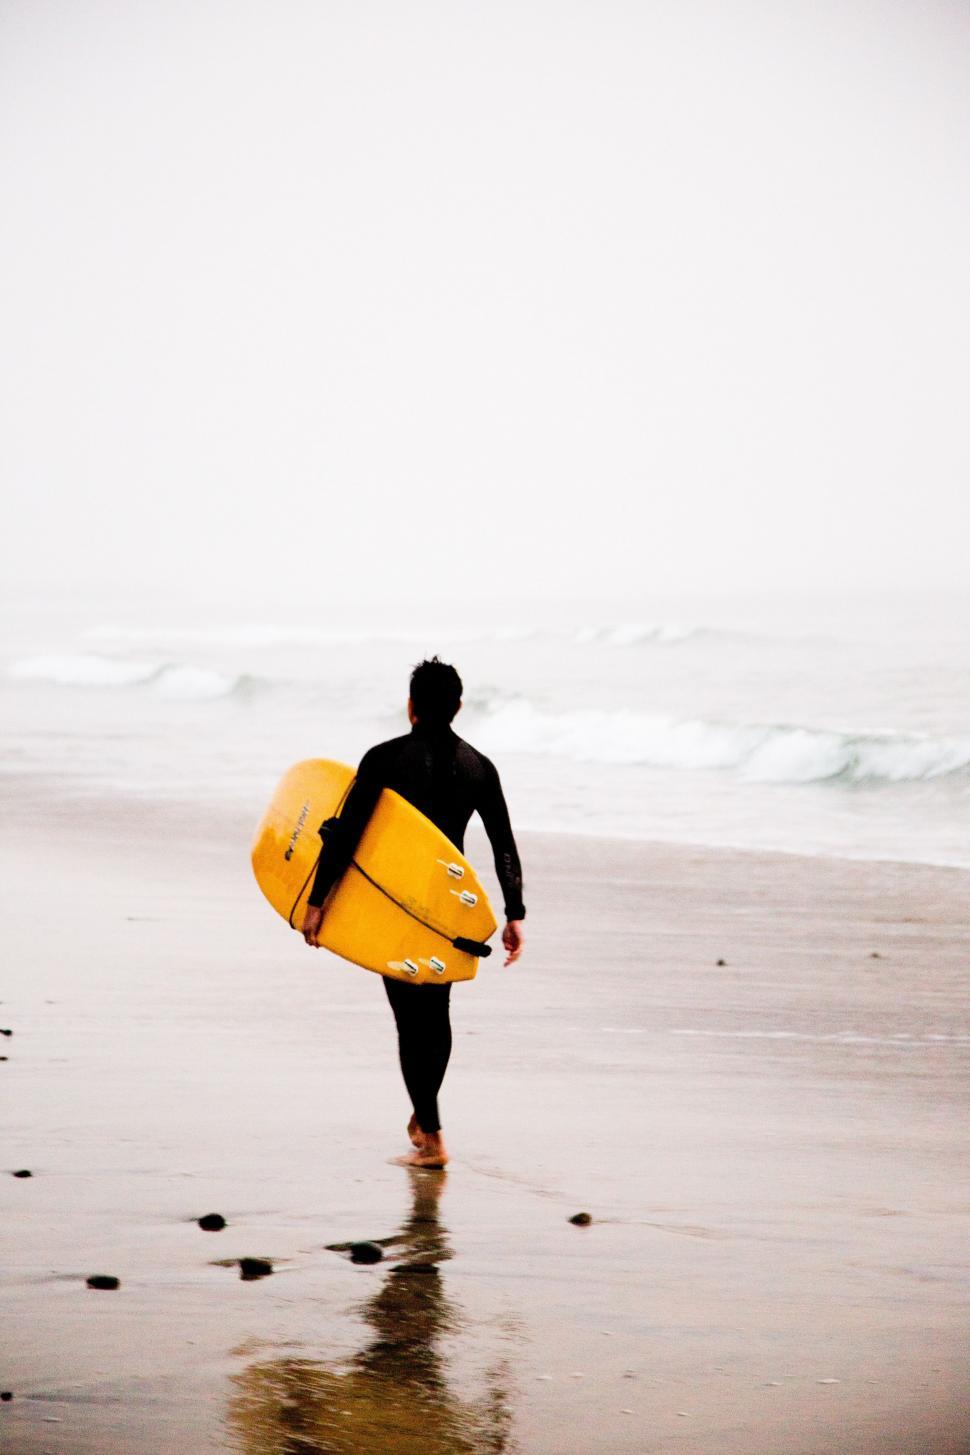 Free Image of Man Carrying Yellow Surfboard on Beach 